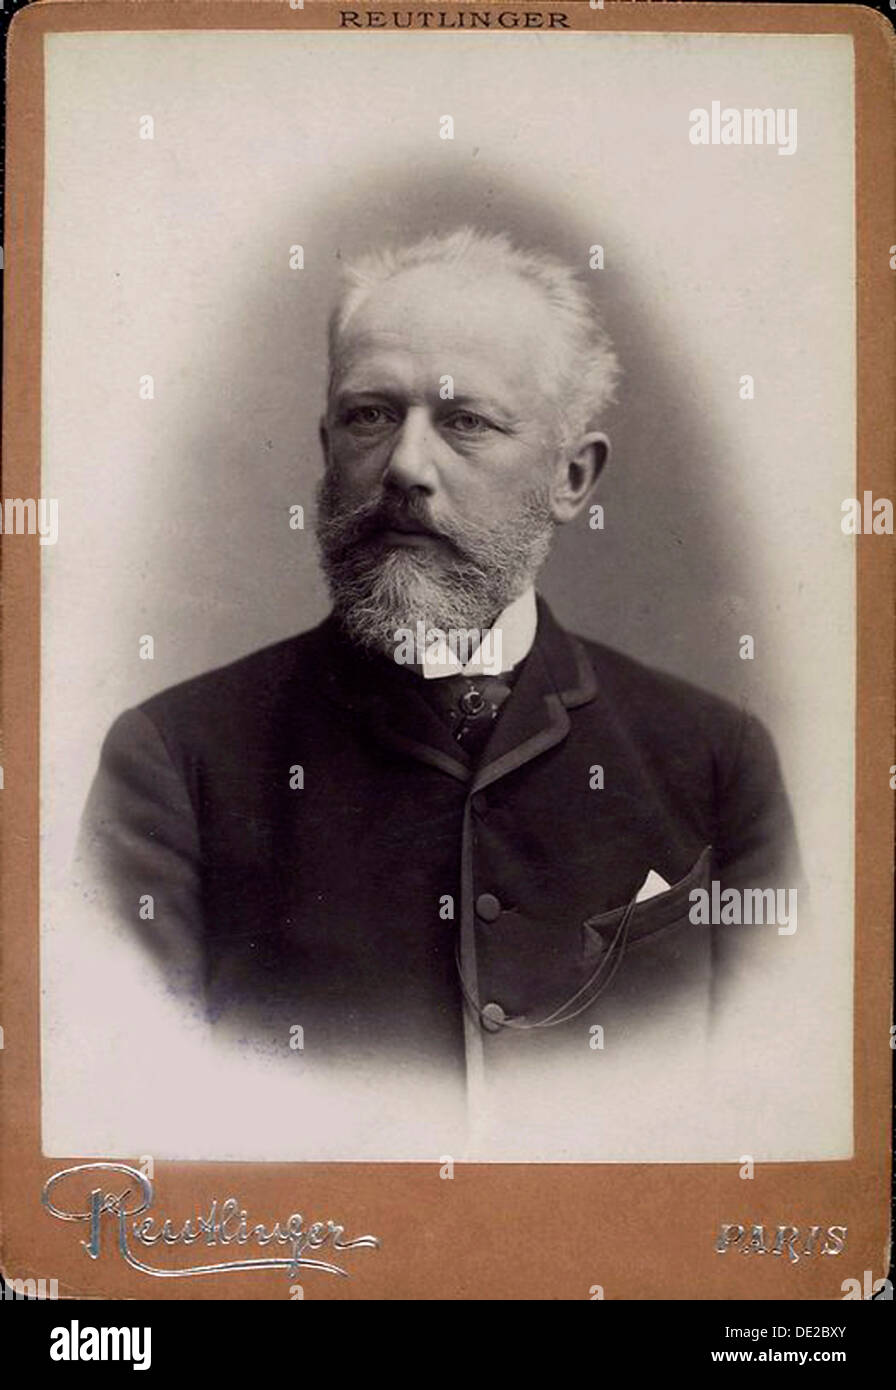 Peter Ilich Tchaikovsky, Russian composer, late 19th century. Artist: Charles Reutlinger Stock Photo